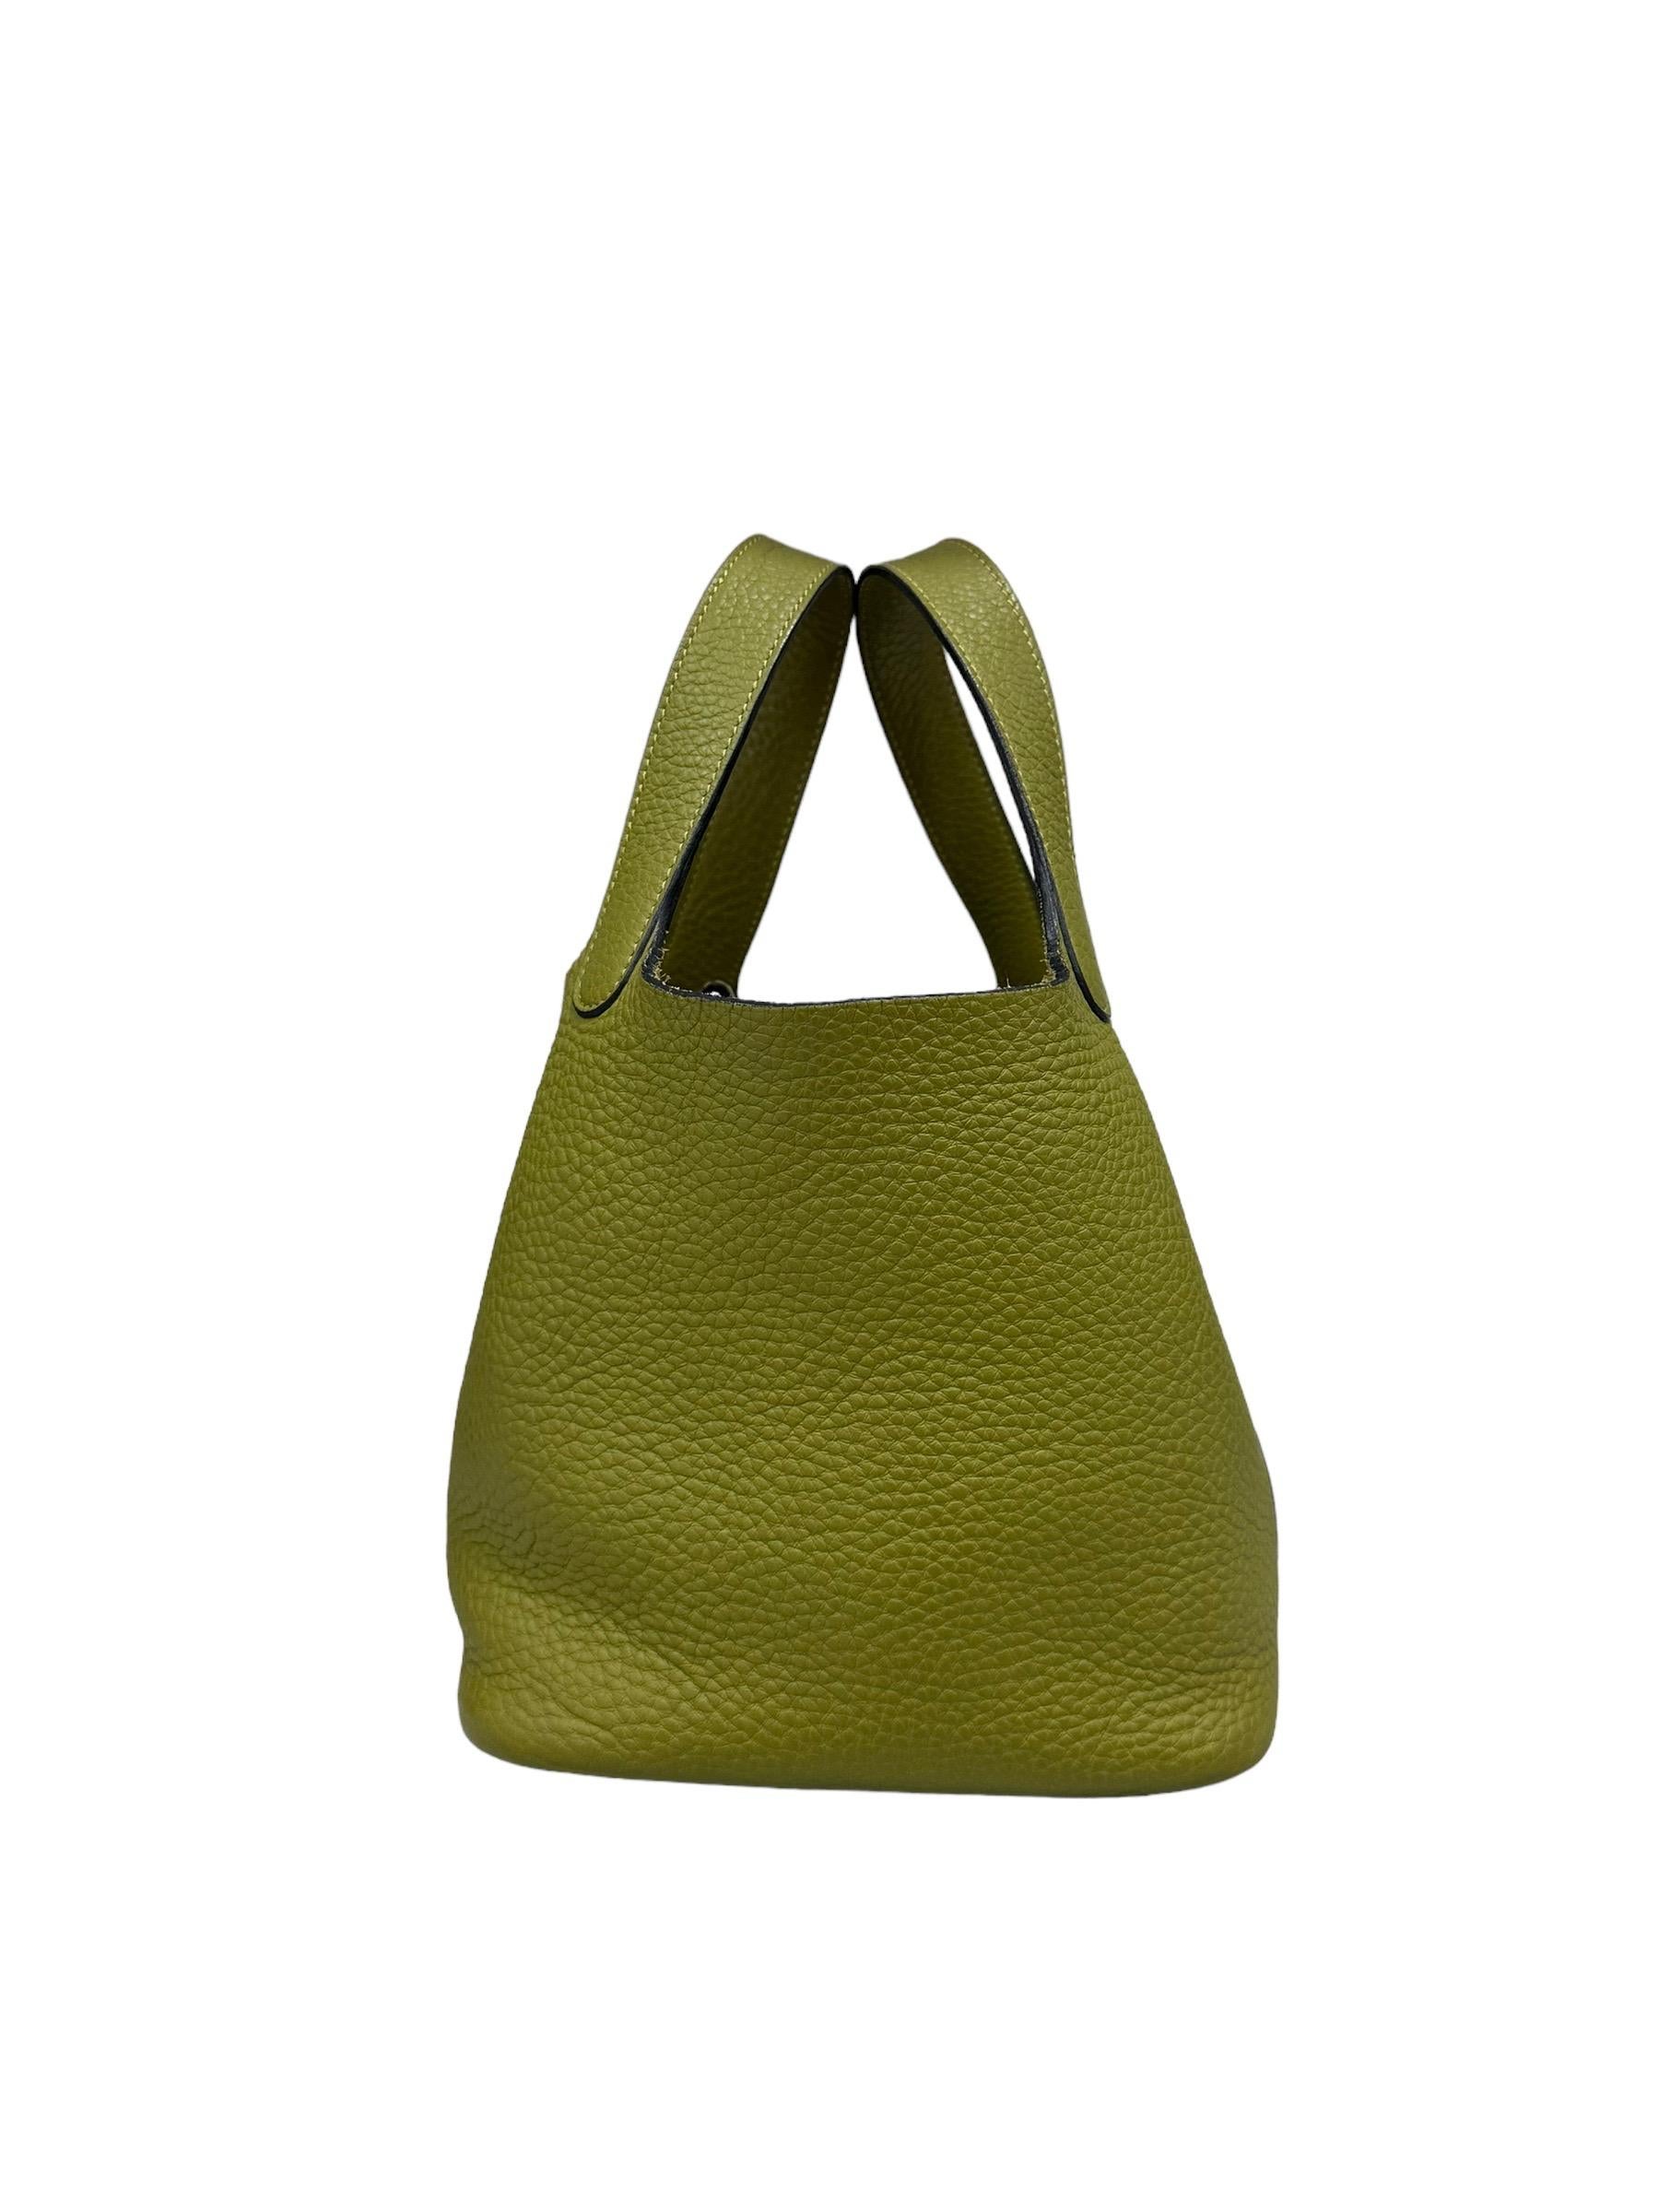 Hermès handbag, Picotin model, size 18, made in Clemence leather, soft and textured to the touch, Vert Anis color with silver hardware. Equipped with a wide opening with a central band in green leather equipped with an interlocking closure. The